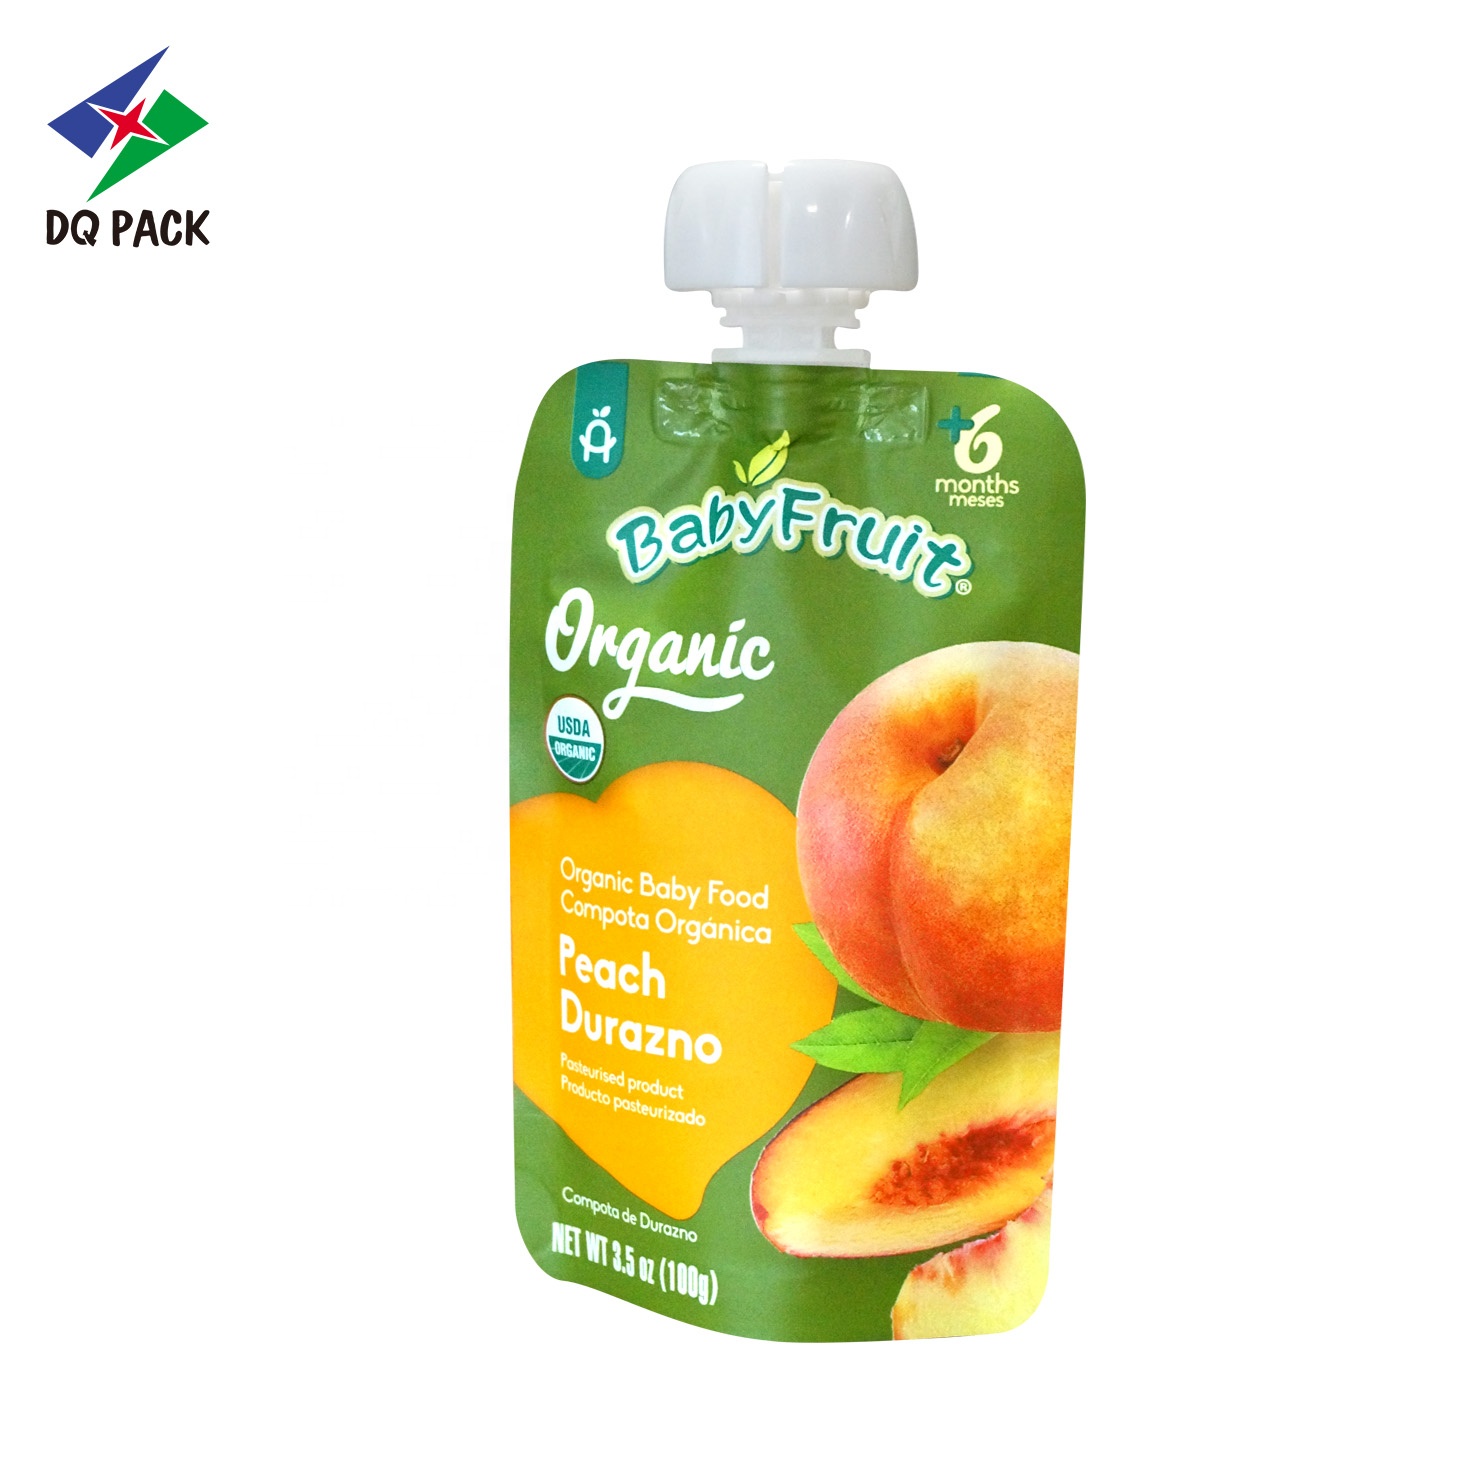 DQ PACK Sample Free Best Organic Baby Food Pouch With Nozzle